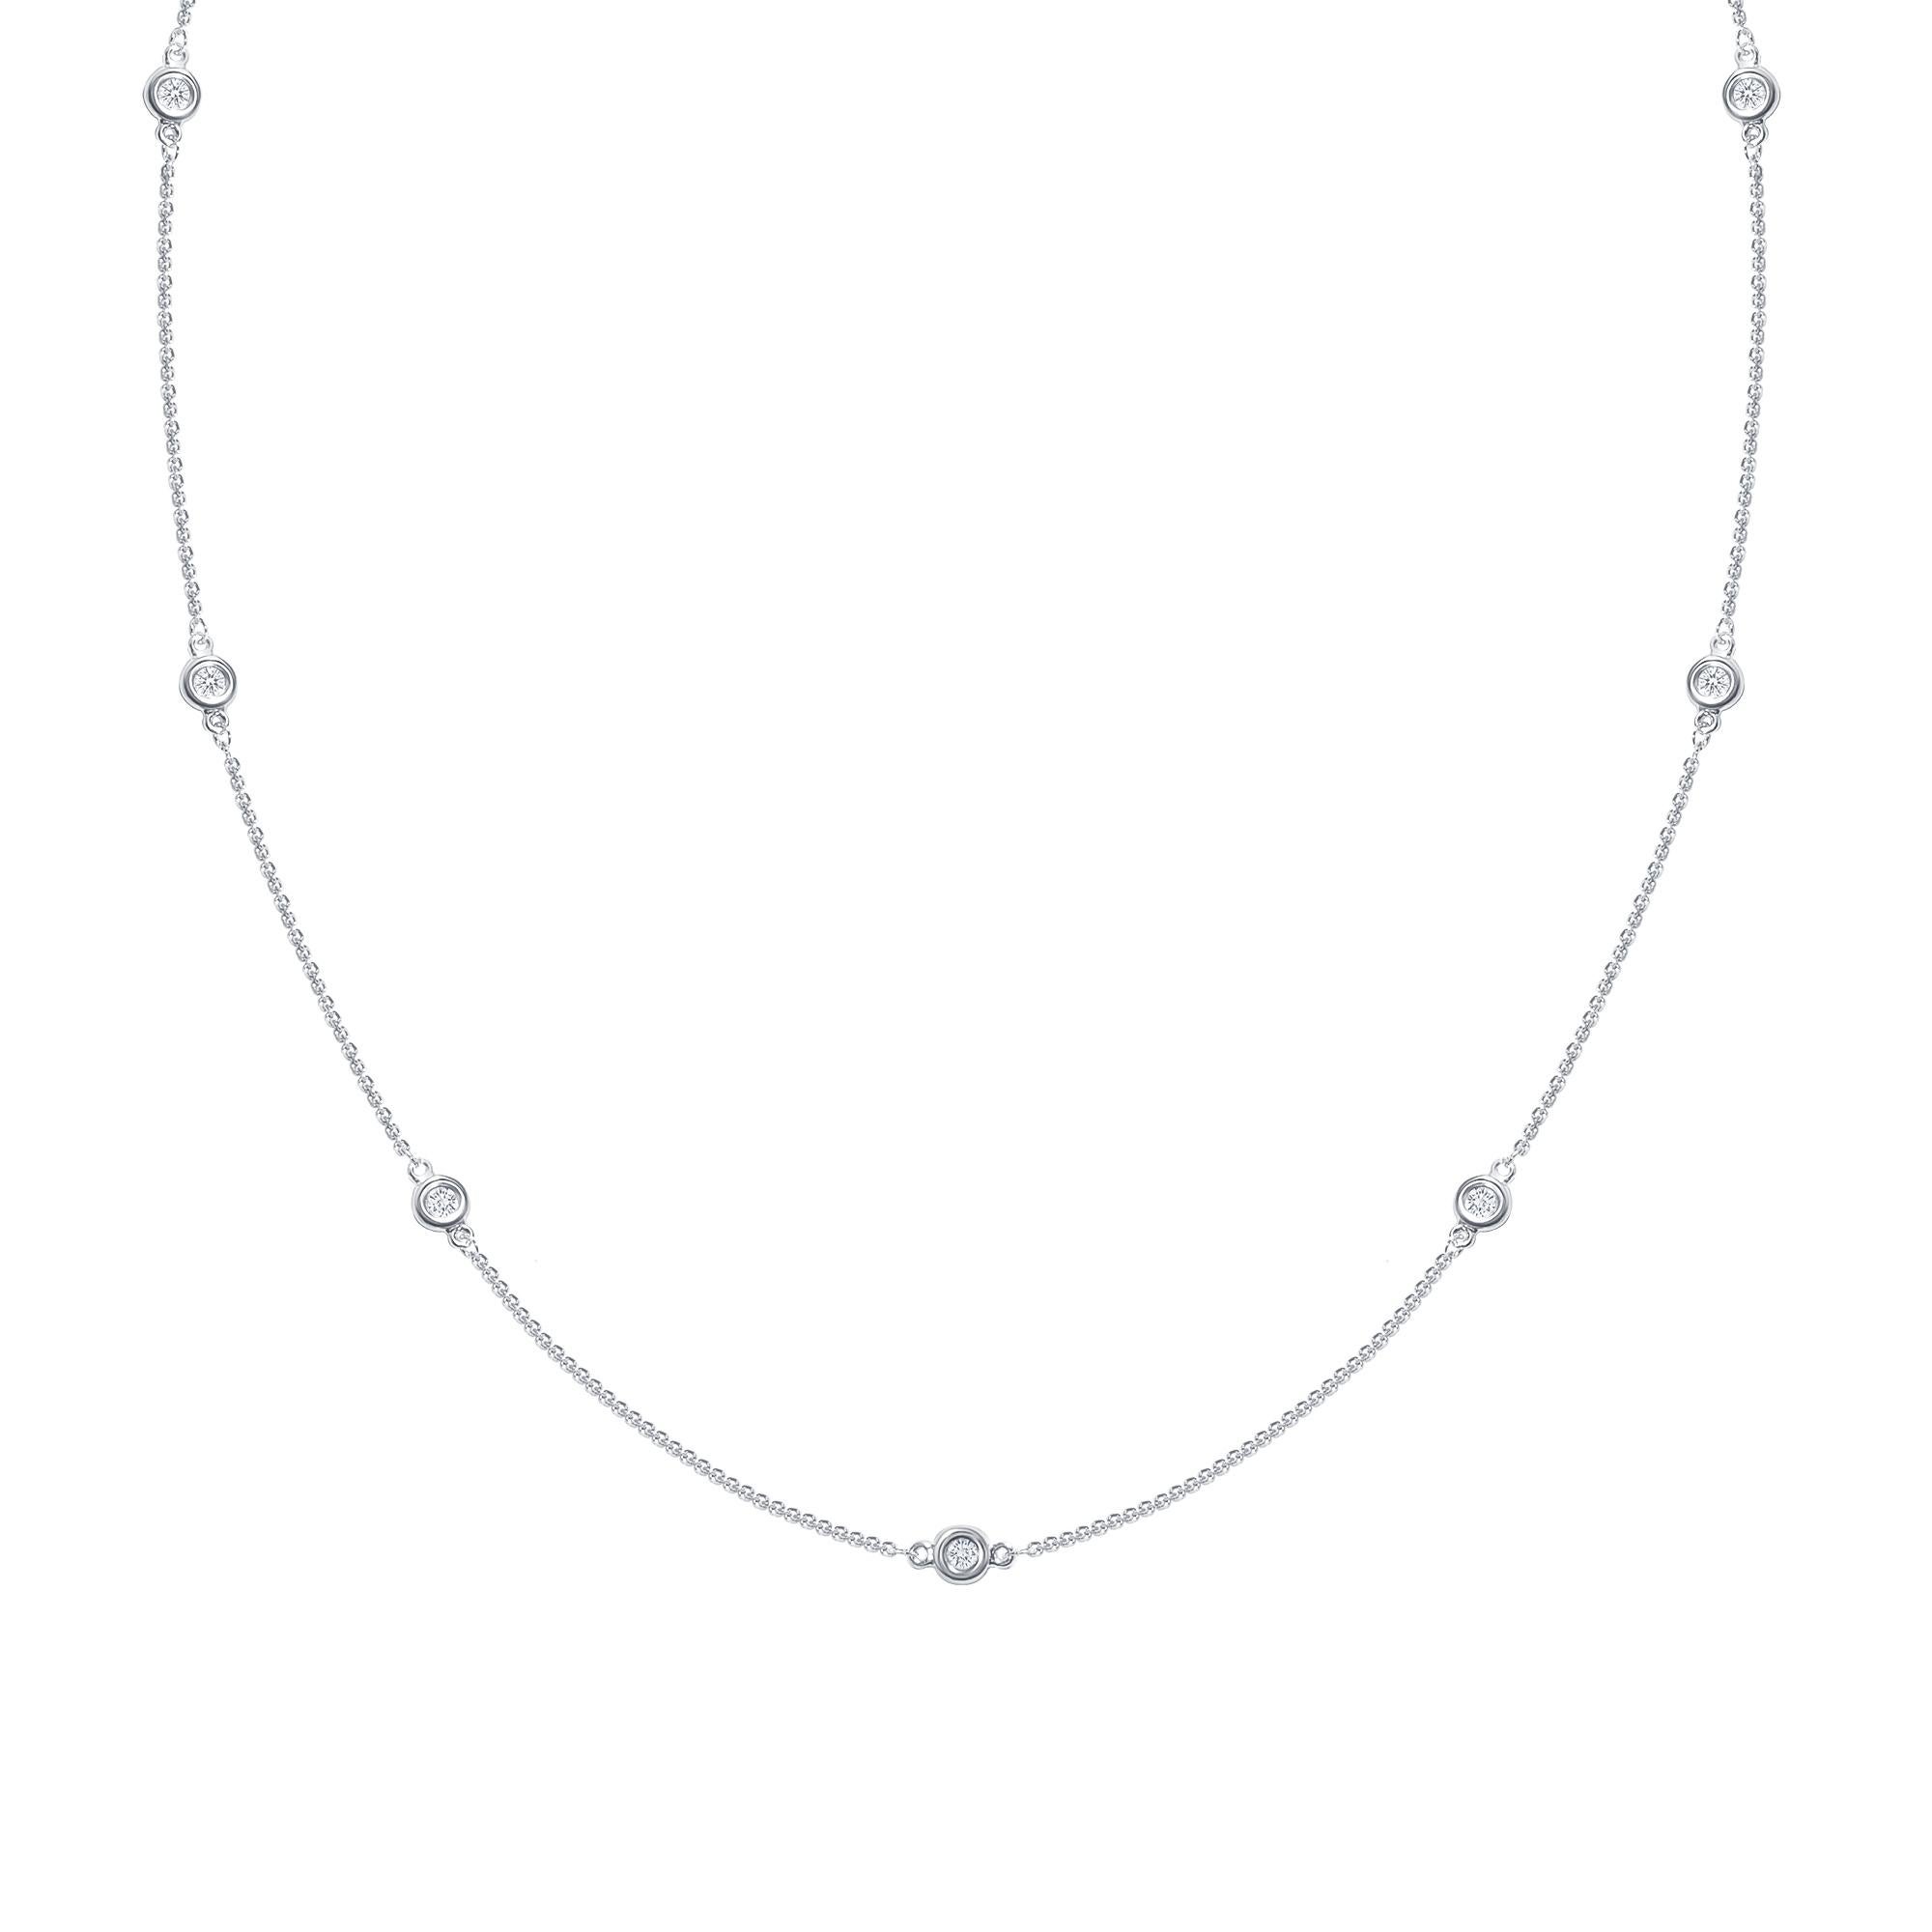 Eight elegant round diamonds set in a bezel setting along a 14k gold chain necklace.

Gold: 14K Gold
Number of Diamonds: Eight
Gold Color: White Gold
Carat: 1 Carat
Necklace Length: 20 Inches
Diamond Clarity: VS
Diamond Color: F
Chain Type: